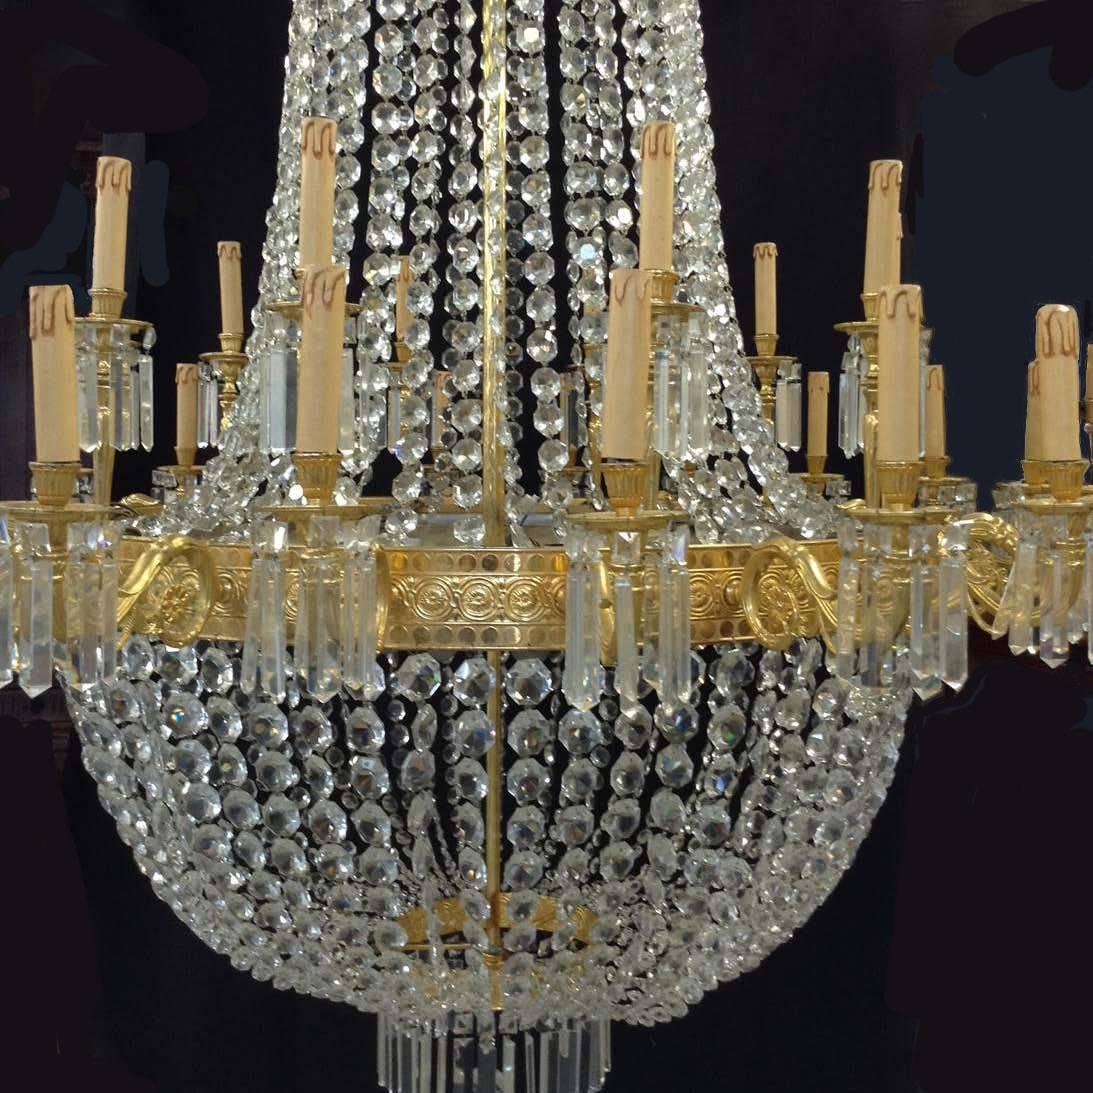 A large imposing 10 foot high Empire style chandelier with an gilt bronze anthemion cast corona hang with chains of crystal drops, with a central gilt bronze band depicting guilloche and paterae, supporting 20 scrolled, reeded and foliate cast